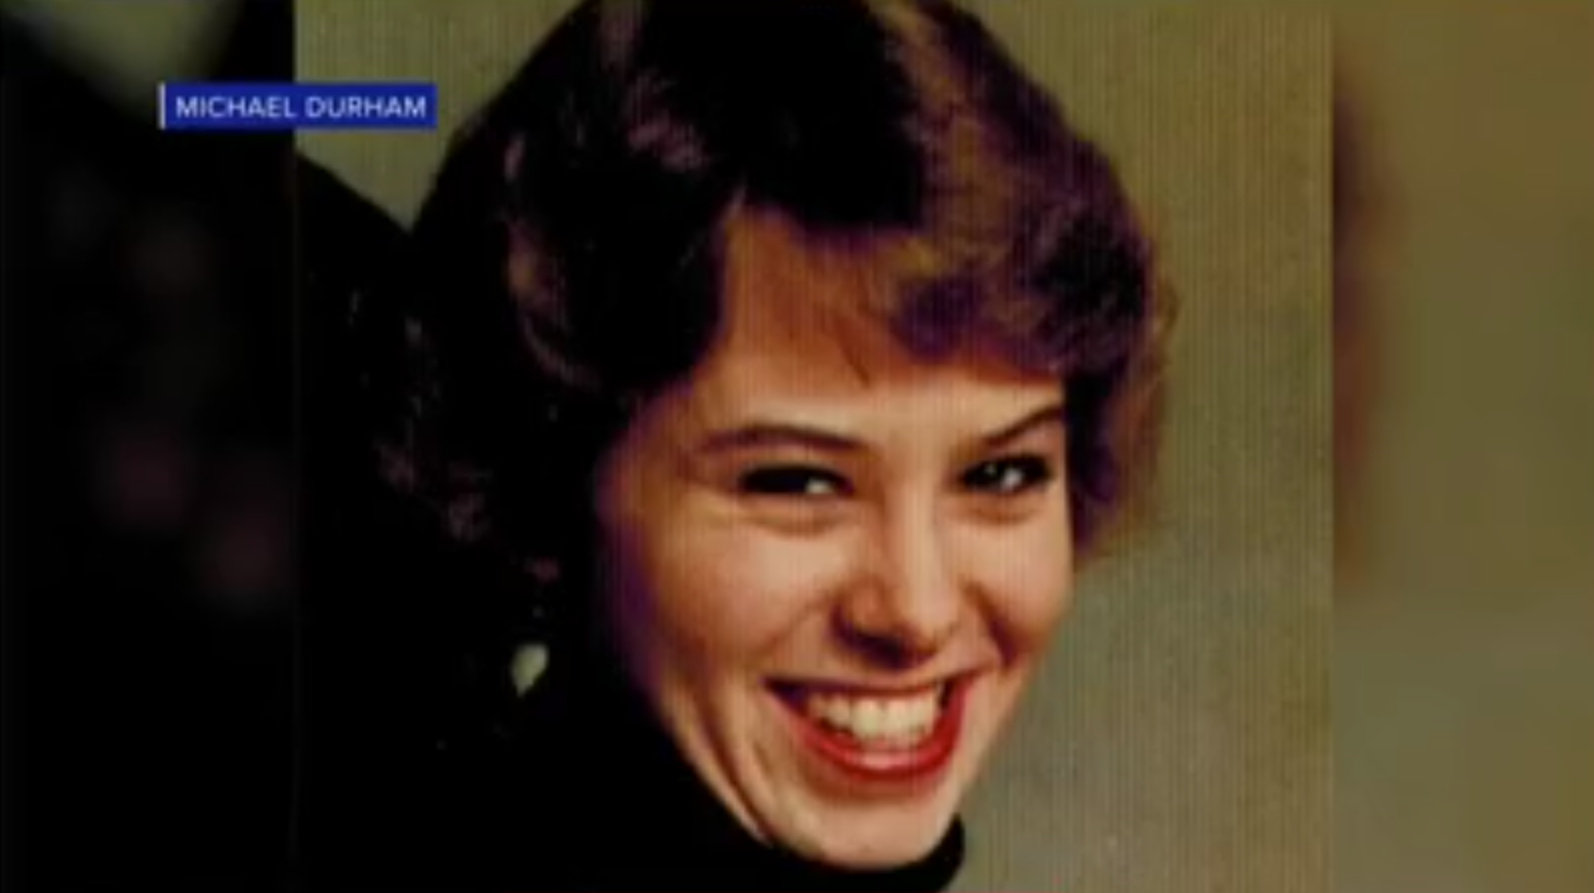 19-year-old Cassandra Durham, who disappeared in 1987 after a road trip with her boyfriend, smiles at the camera.